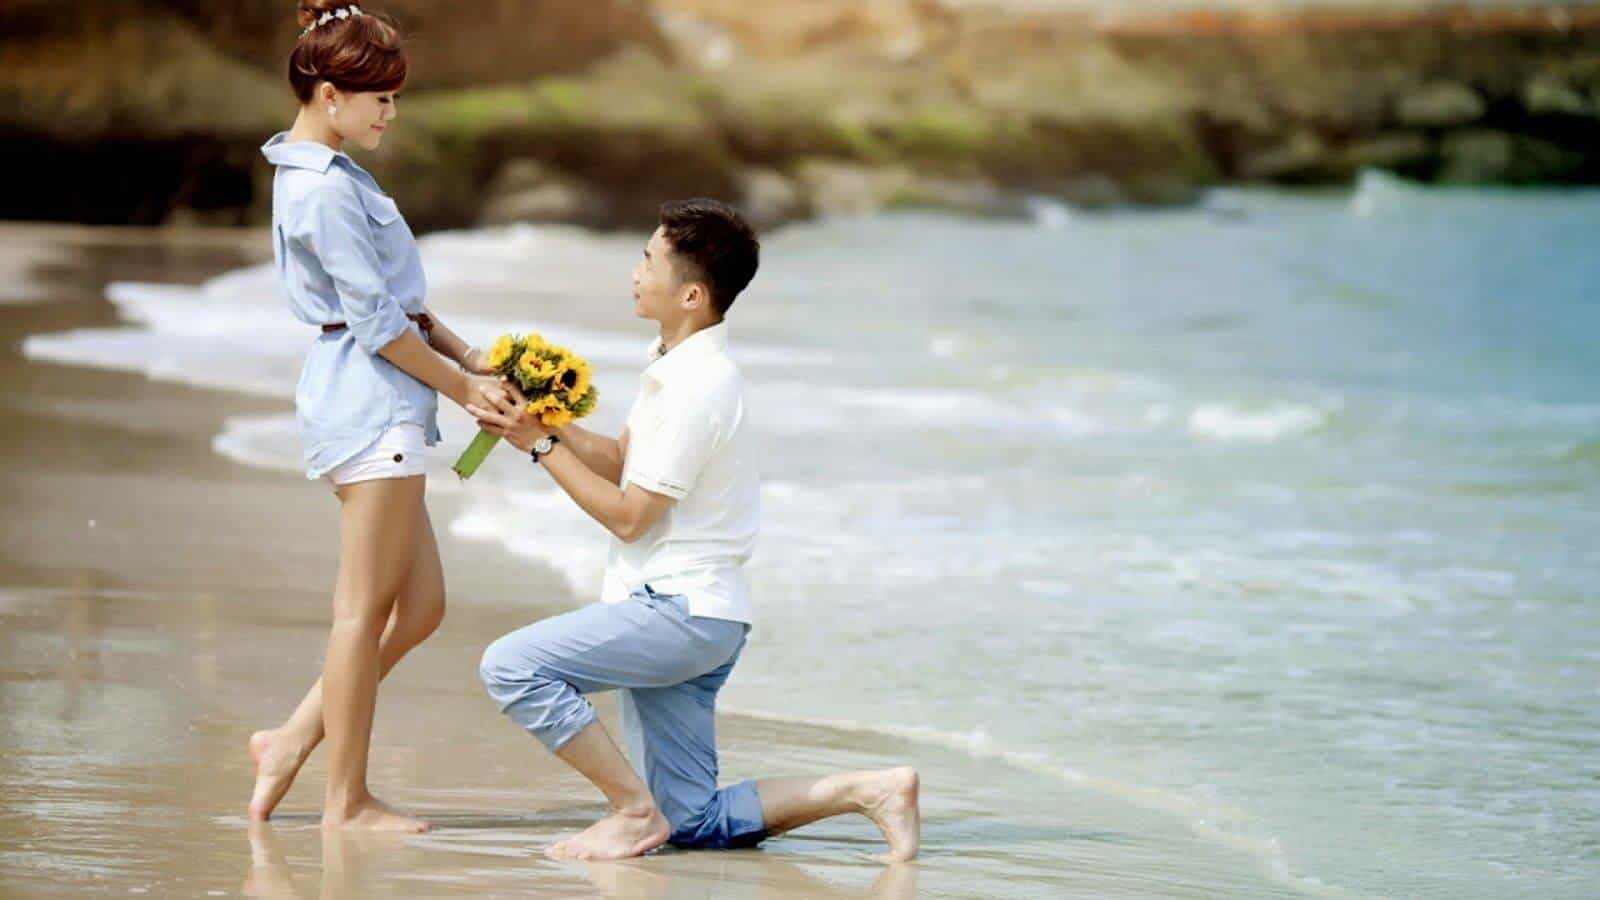 Propose Day Images for Best Friend